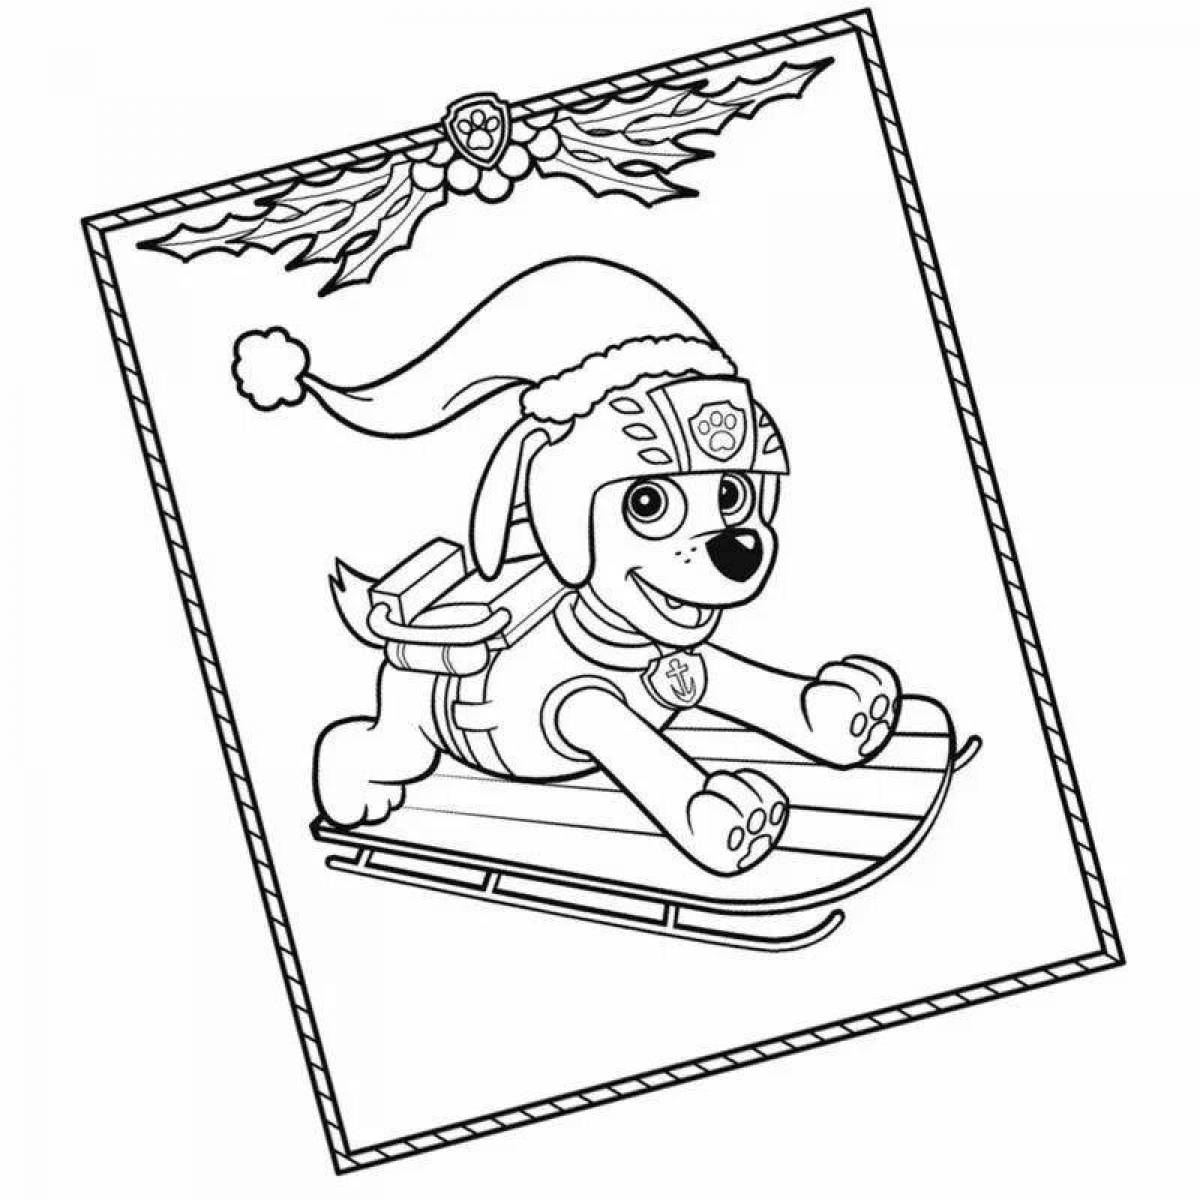 Exciting new year paw patrol coloring book